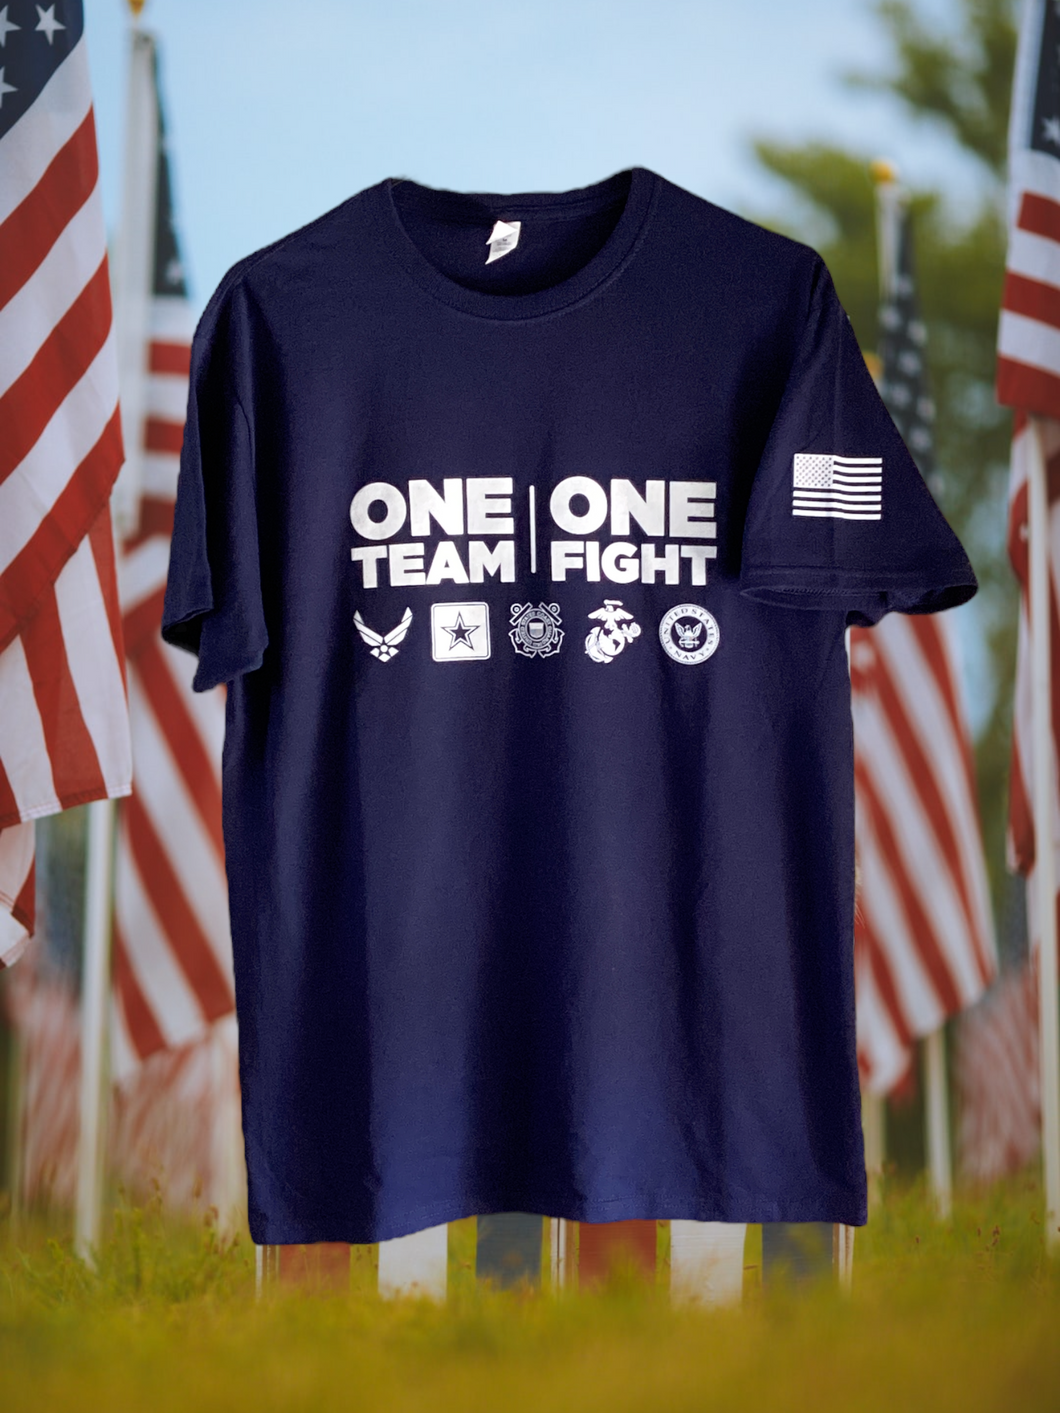 One Team One Fight T shirts